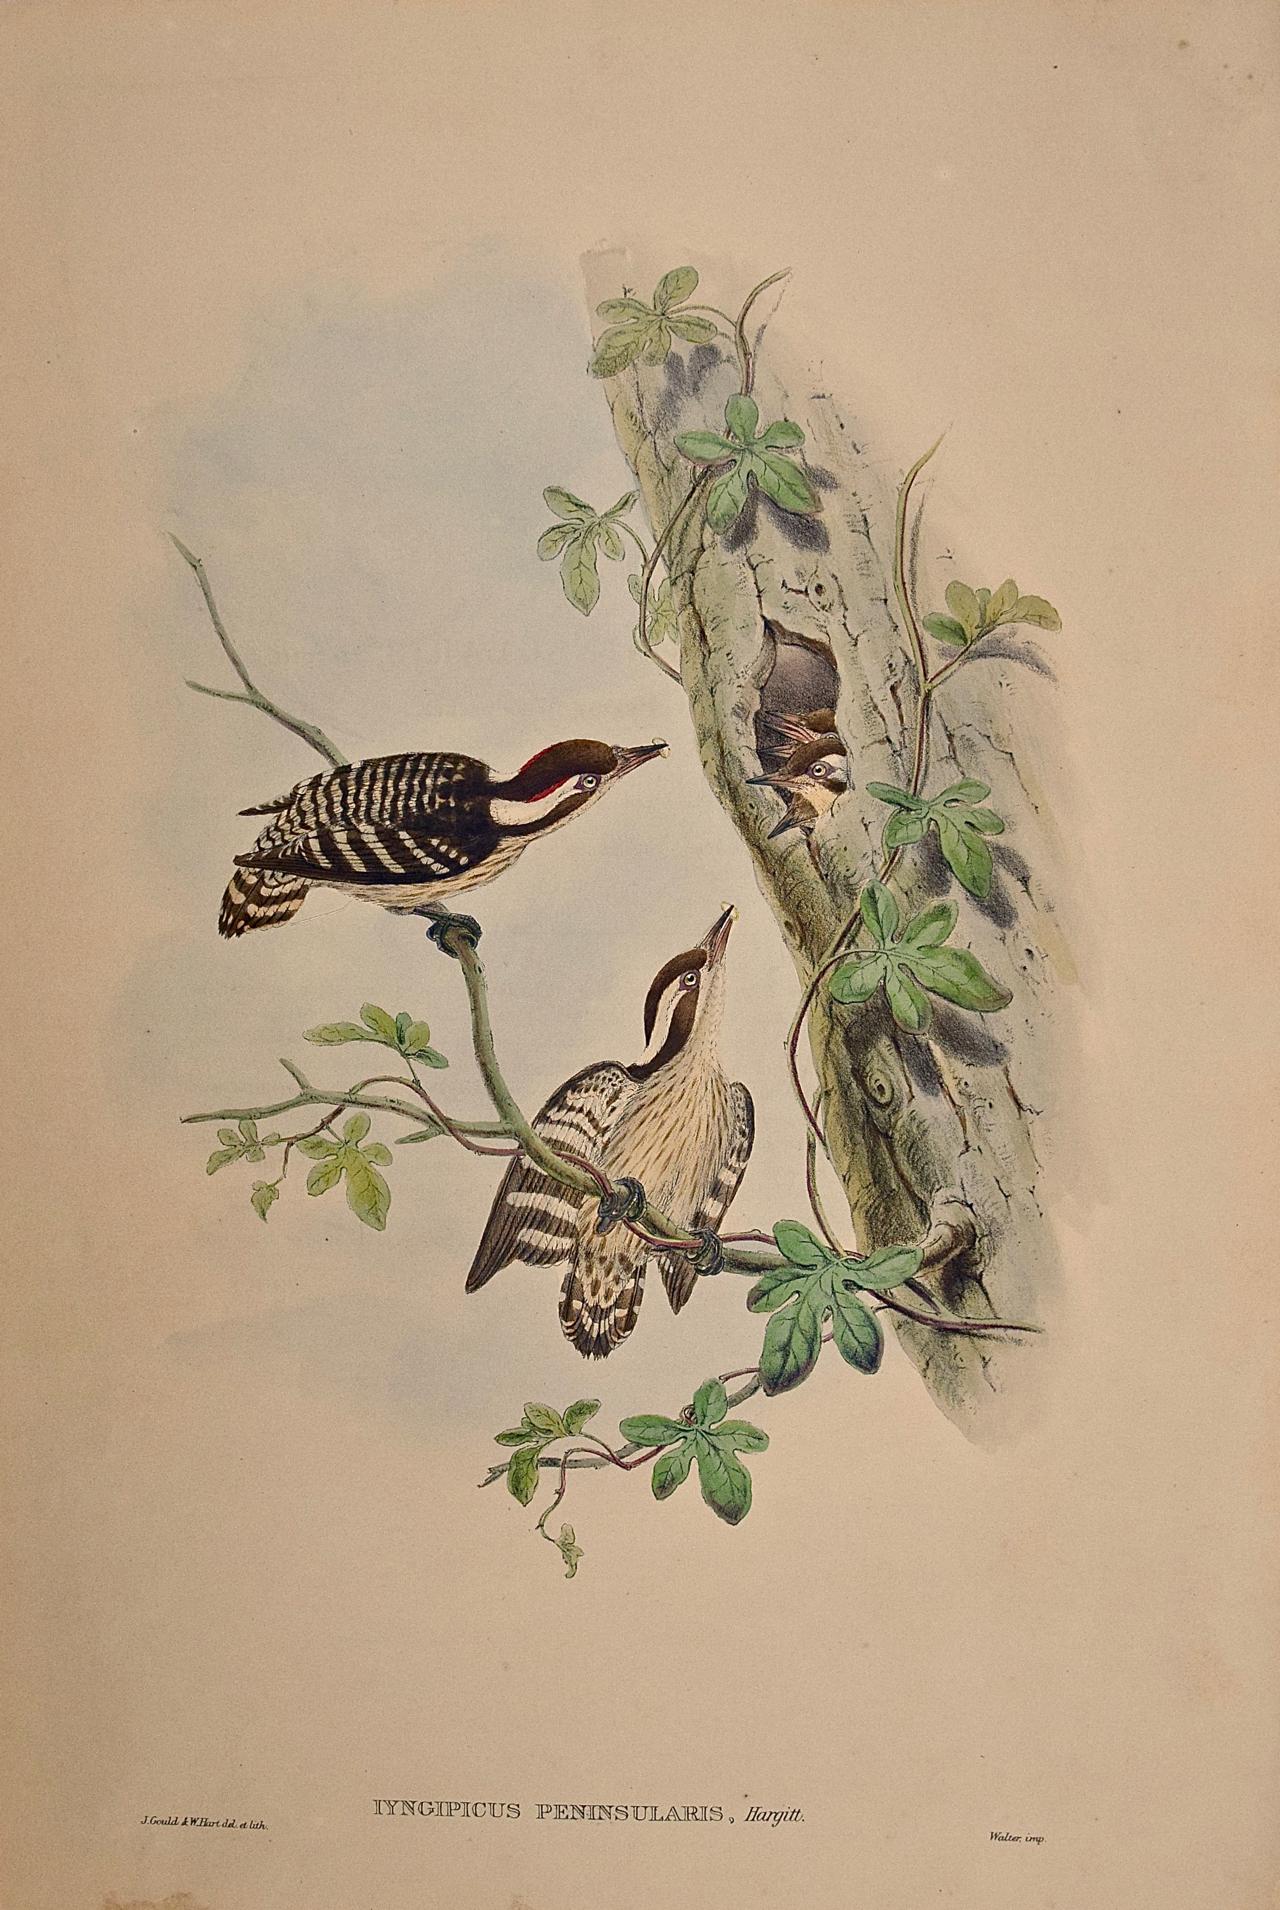 John Gould and Henry Constantine Richter Animal Print - Woodpeckers, Travancore Peninsularis: A 19th C. Gould Hand-colored Lithograph